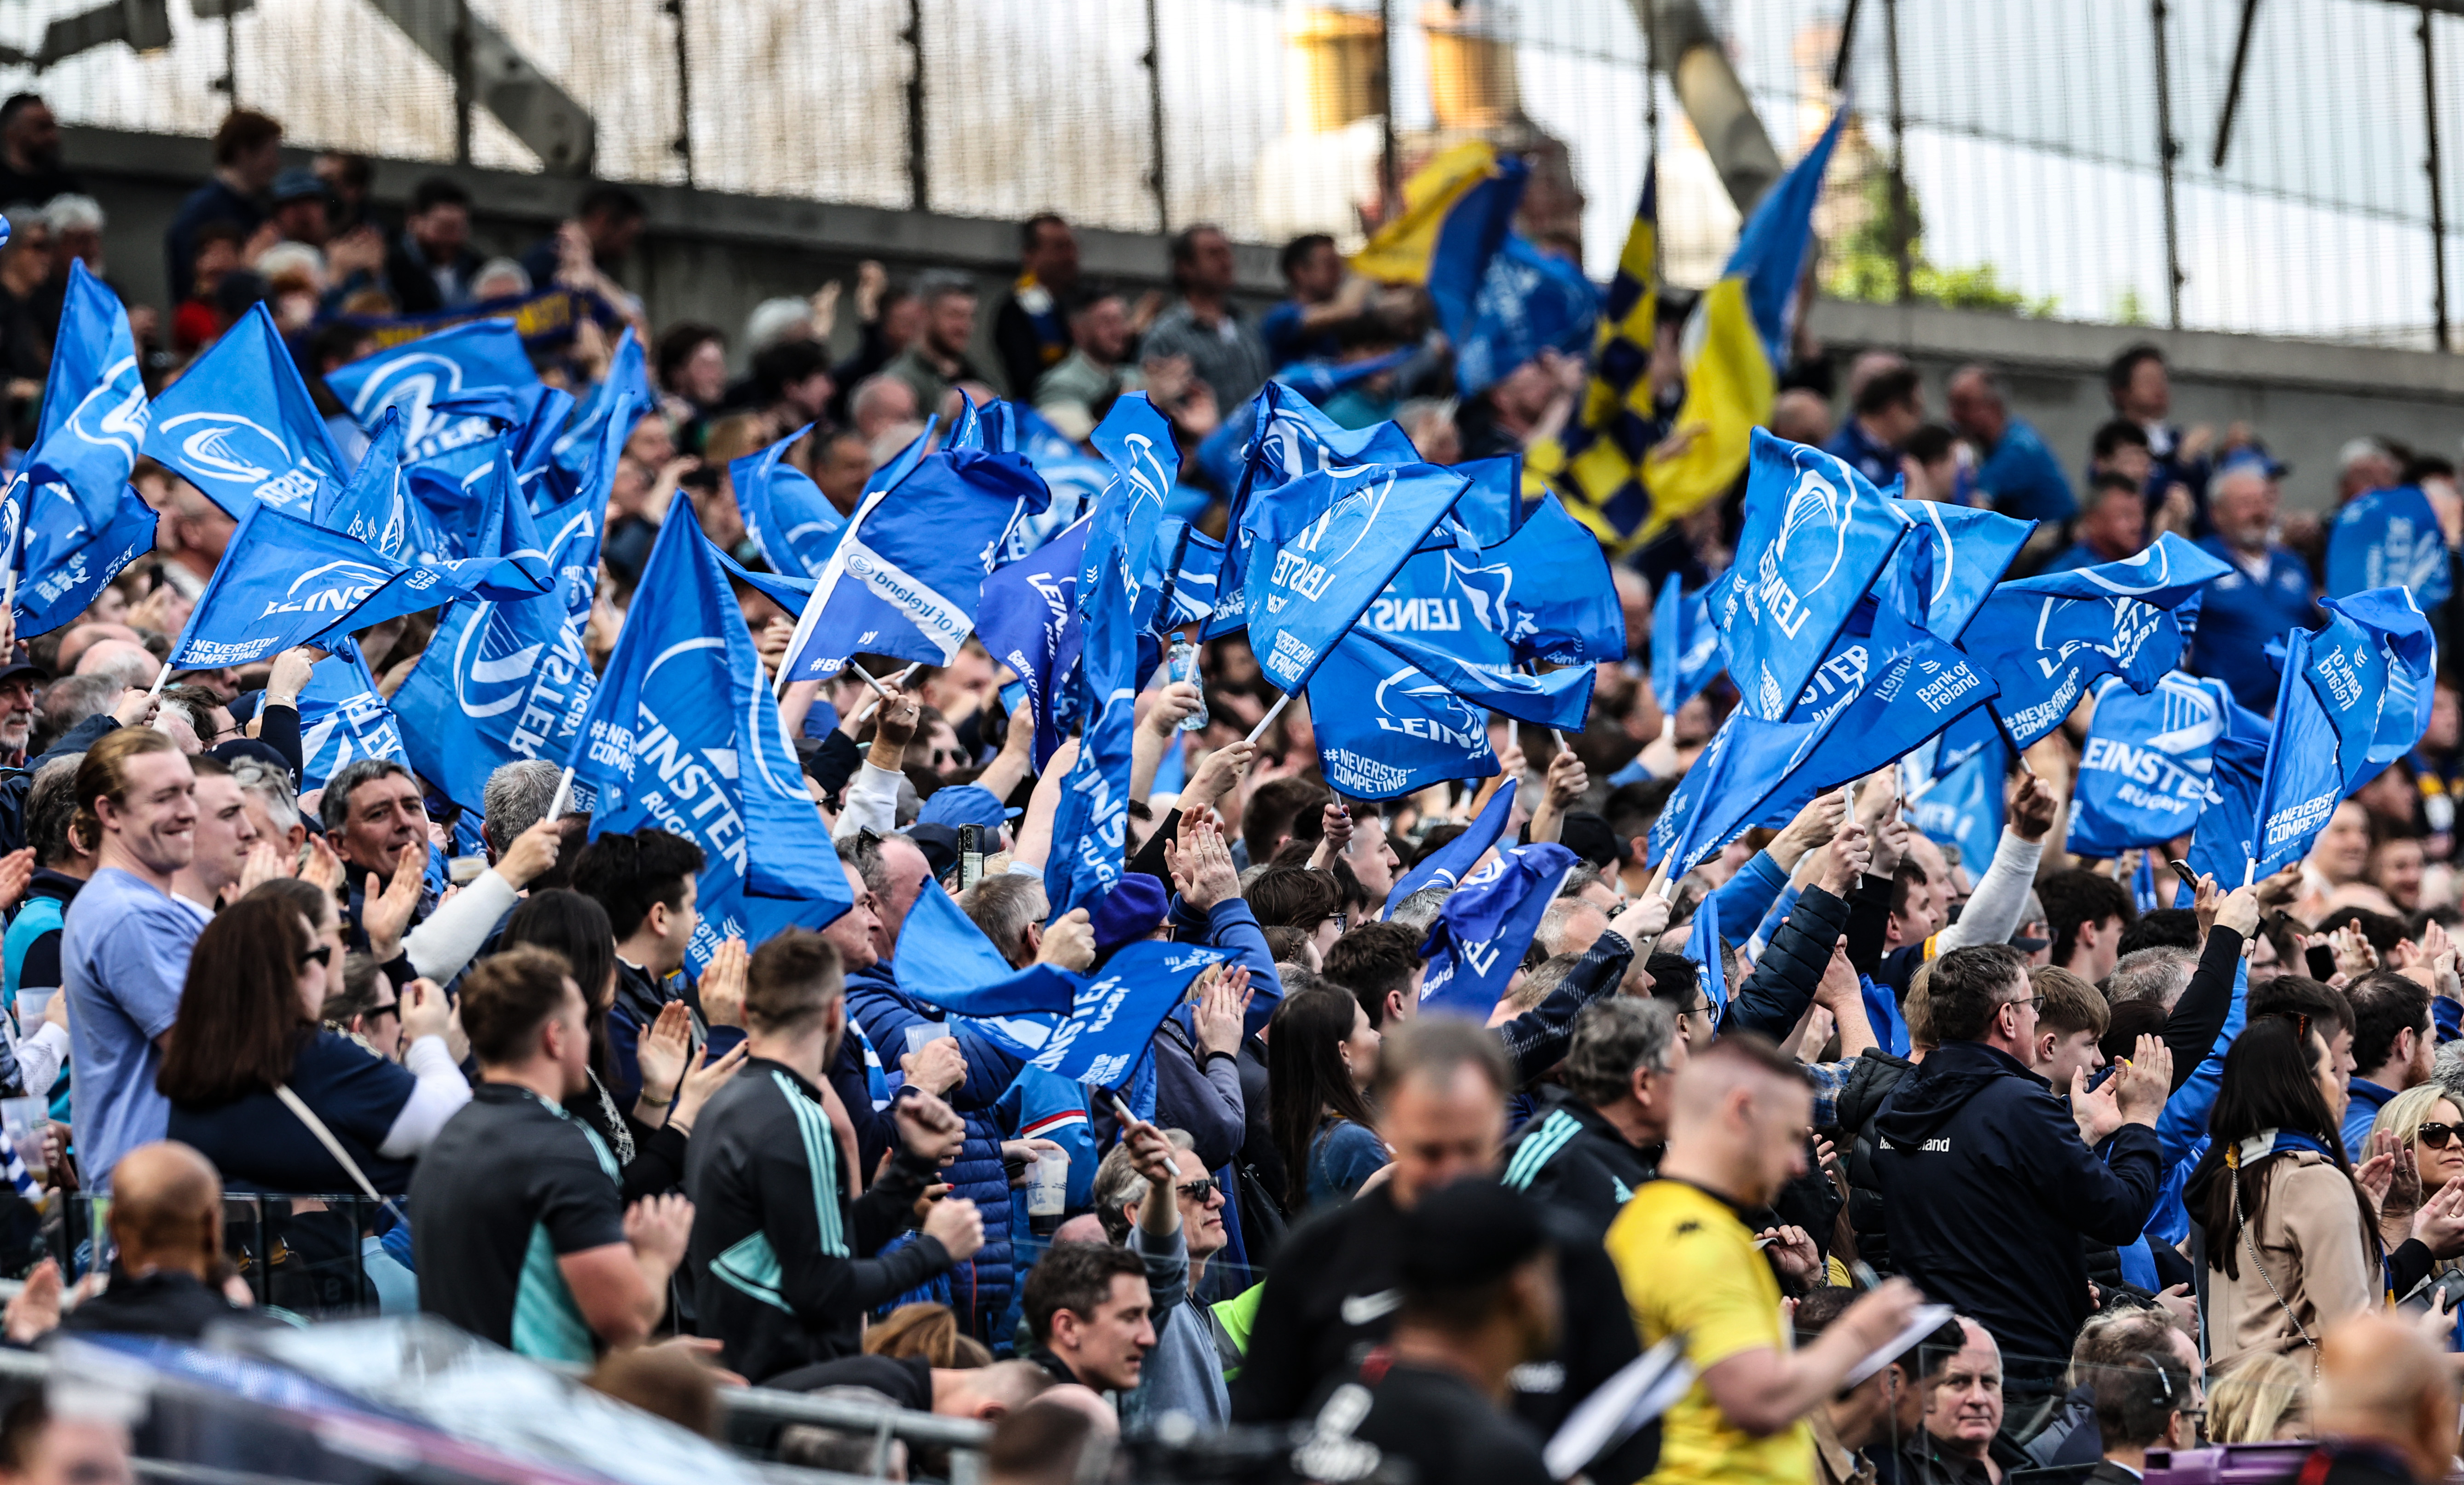 Leinster v La Rochelle Kick-off time, TV channel and latest team news ahead of Champions Cup final